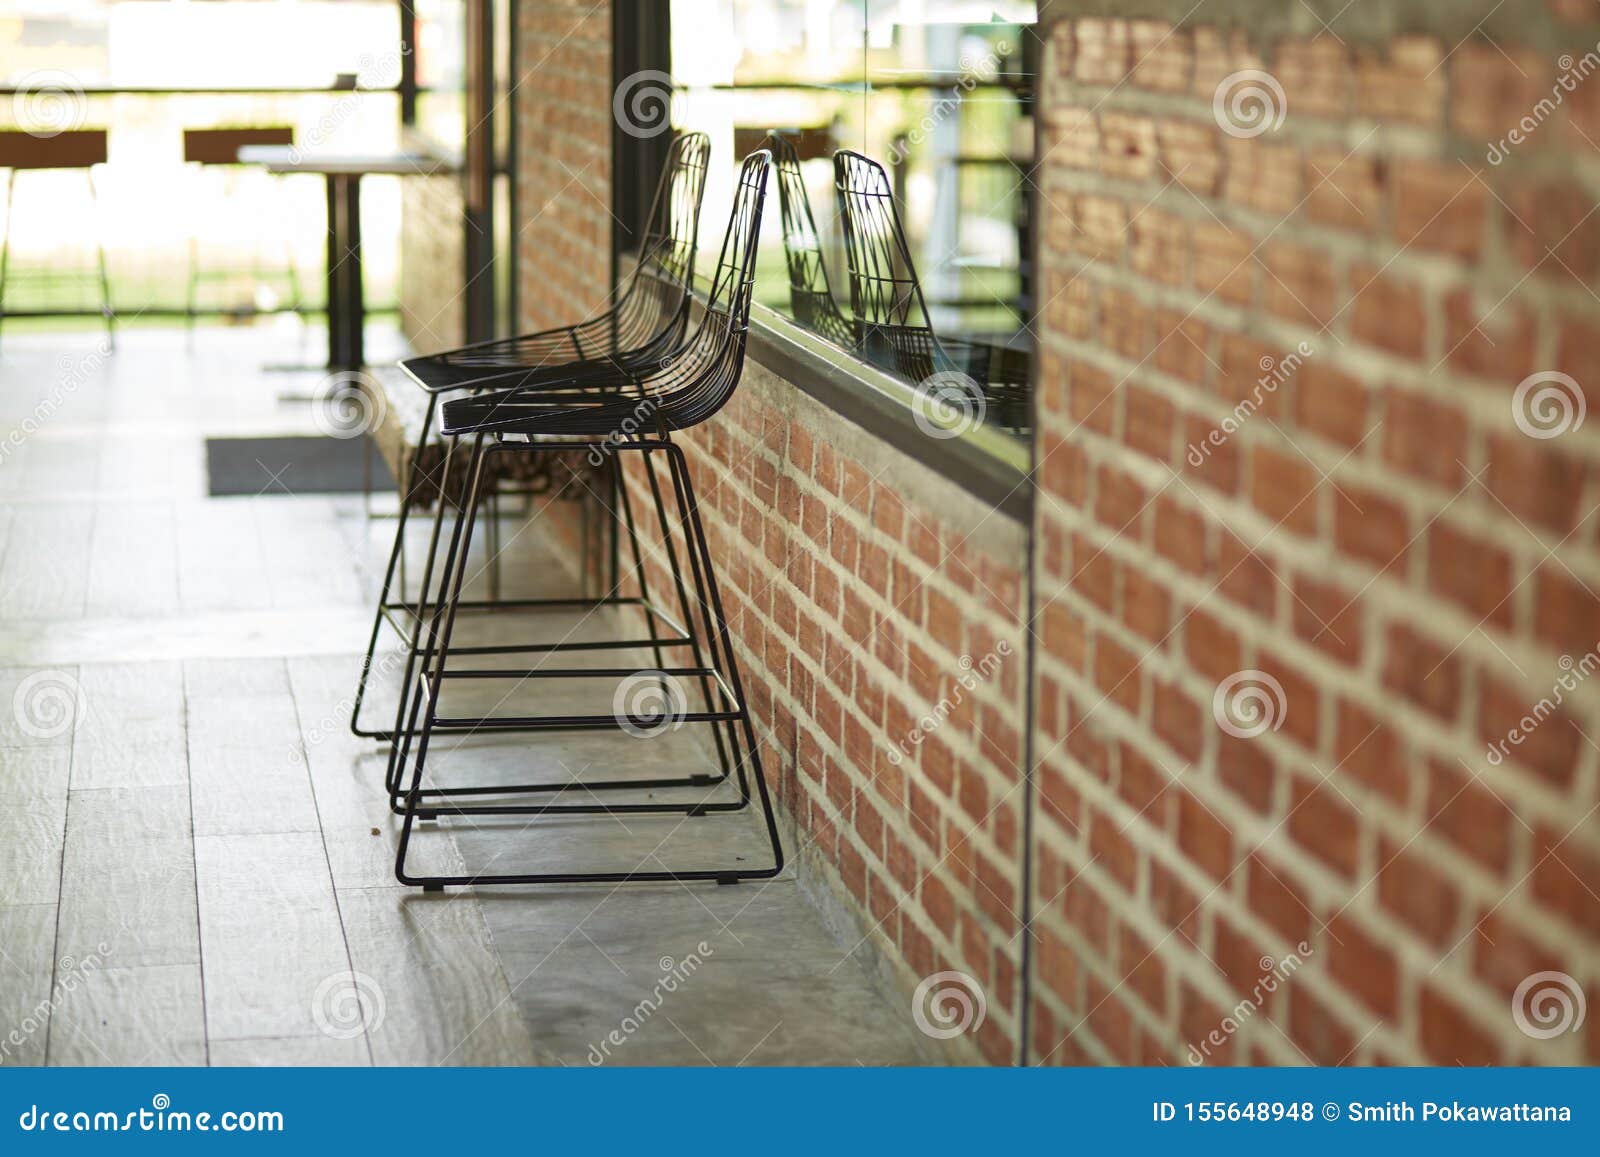 Empty Chair in Front of the Brick Wall Stock Photo - Image of beverage,  building: 155648948